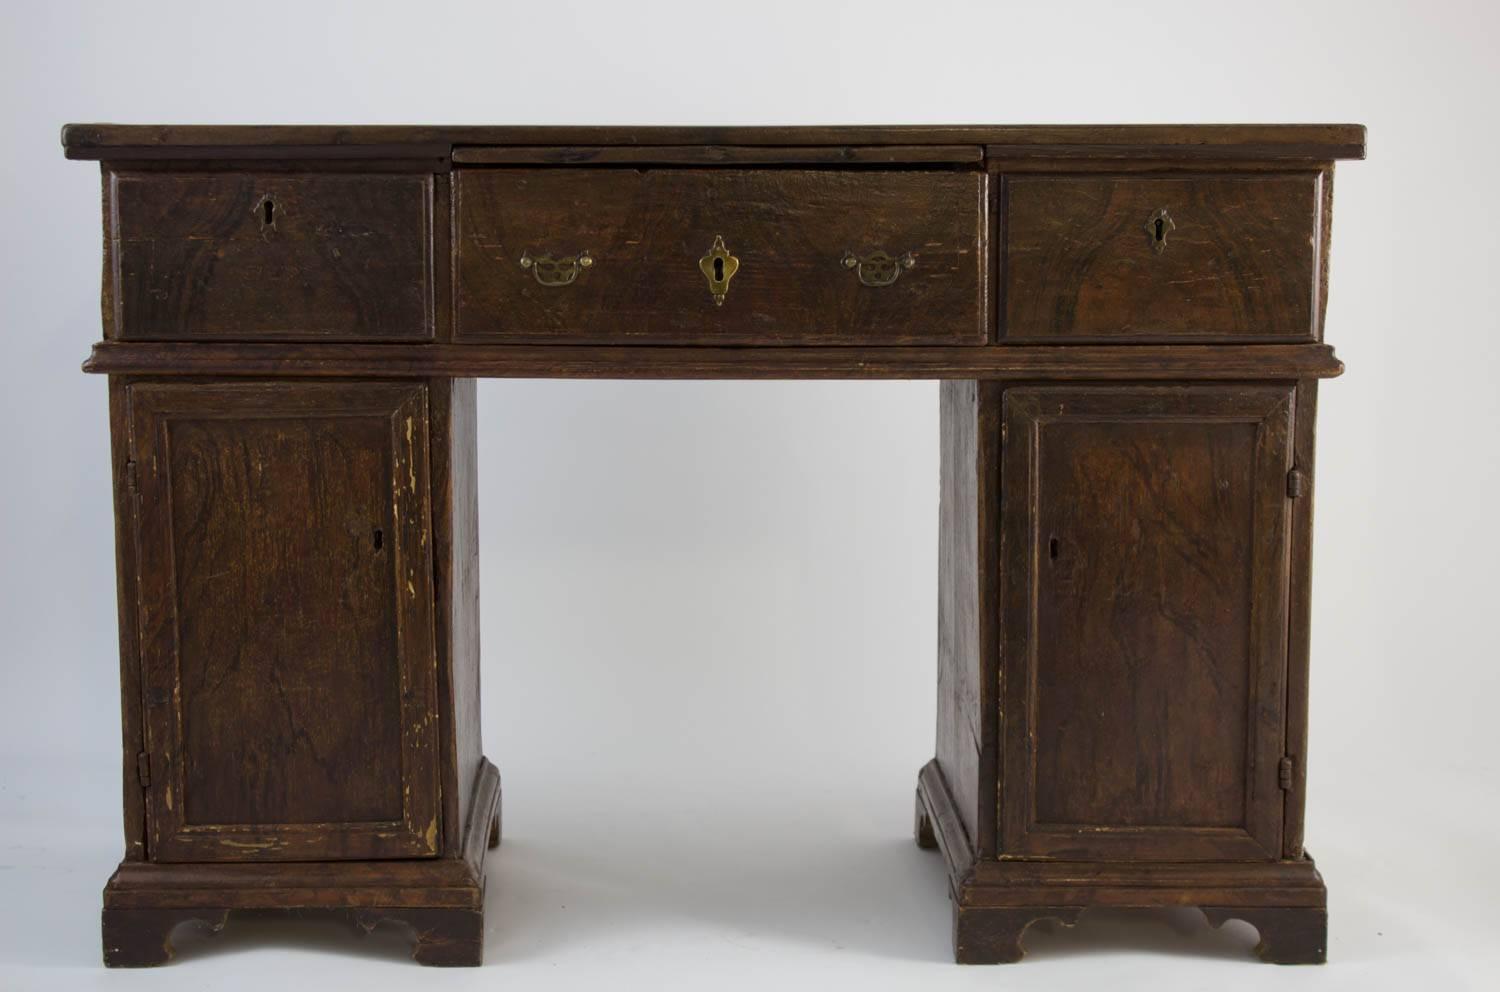 Grain-painted English pine kneehole desk, probably late 19th century, from the collection of Michael S. Smith. This is a well constructed desk with generous storage/shelving. Outside finish is in original grain-painted finish. It sits higher than